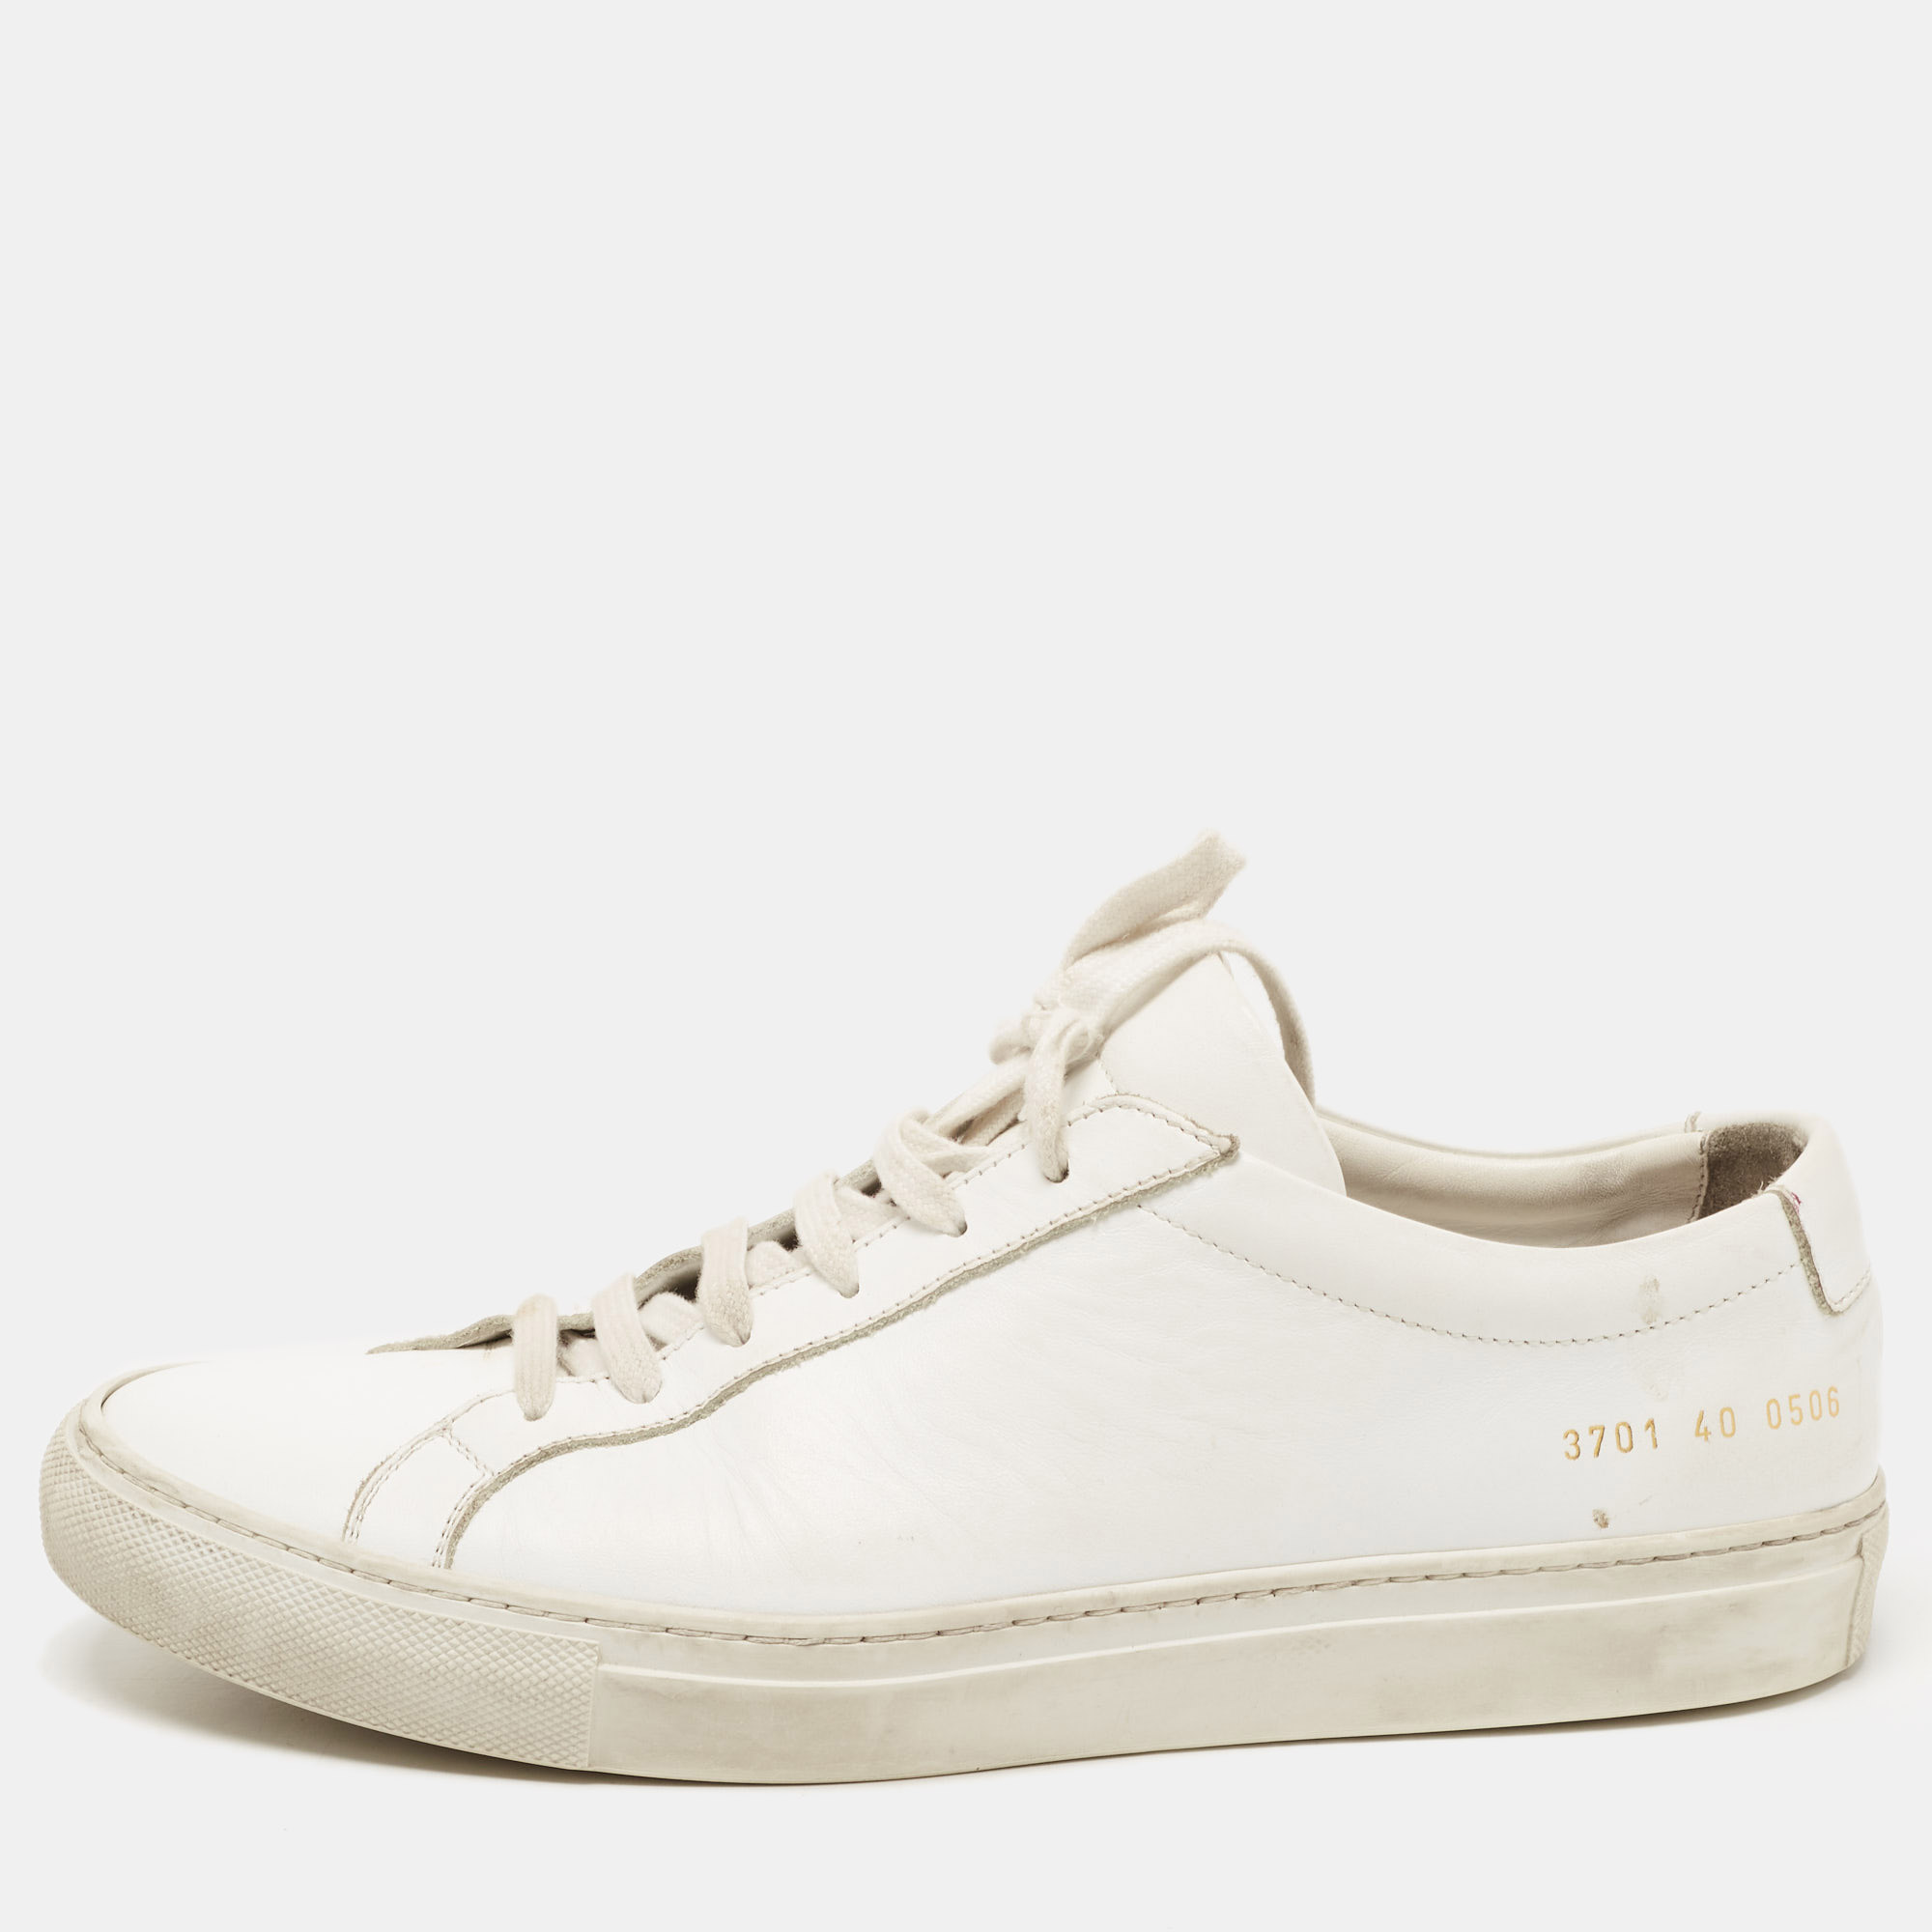 Pre-owned Common Projects White Leather Achilles Sneakers Size 40